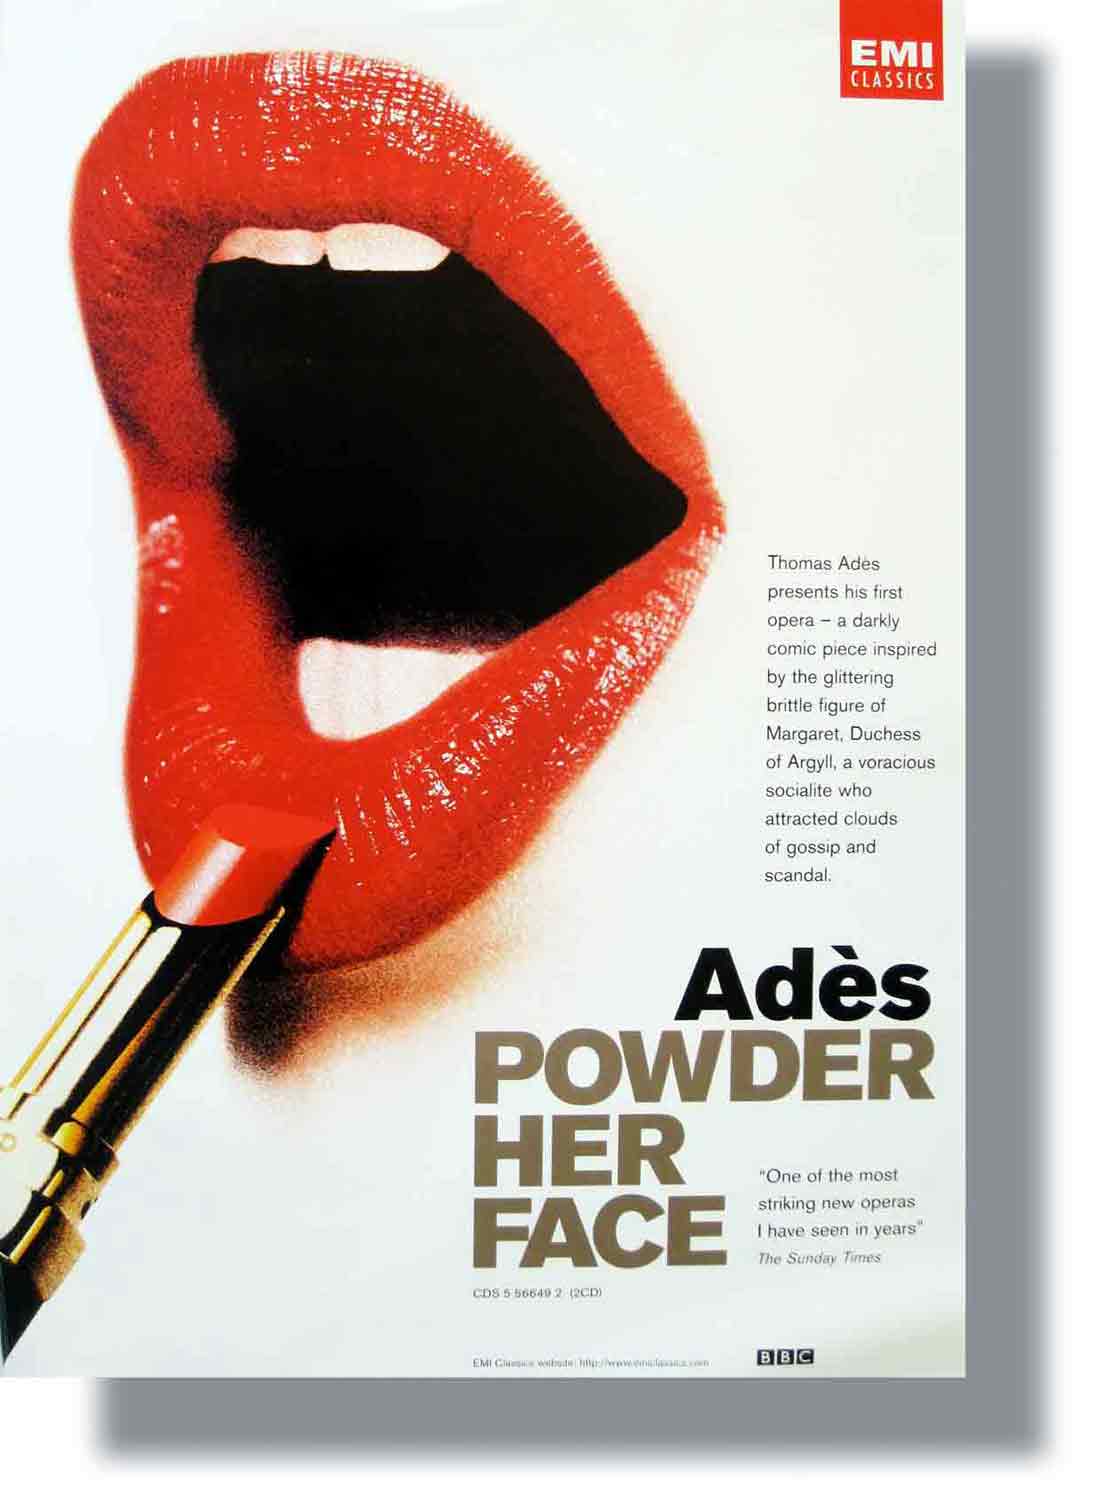 Thomas Ades Powder Her Face opera poster designed by ideology.uk.com